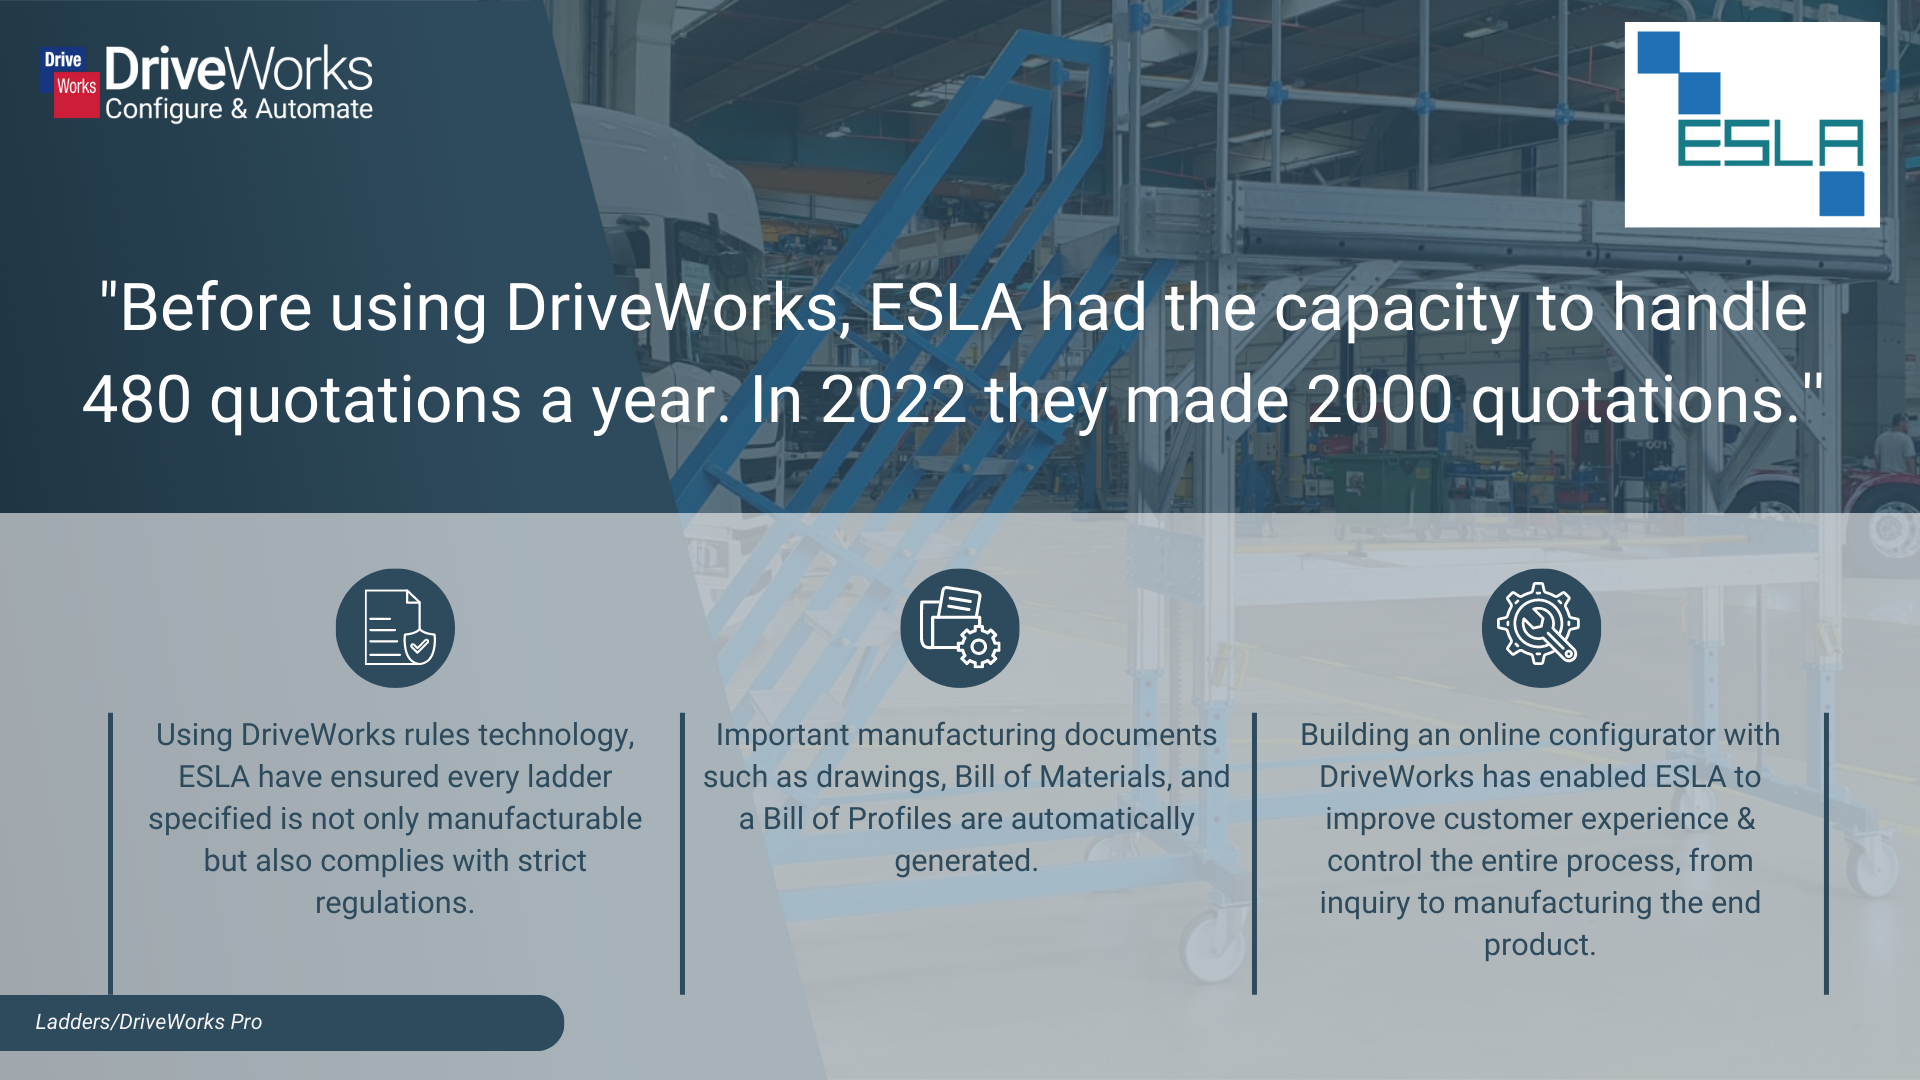 A graphic showing an ESLA ladder, along with someone of the benfits that DriveWorks custome, ESLA, is experiencing thanks to DriveWorks software: Using DriveWorks rules technology, ESLA have ensured every ladder specified is not only manufacturable but also complies with strict regulations. Important manufacturing documents such as drawings, Bill of Materials, and a Bill of Profiles are automatically generated. Building an online configurator with DriveWorks has enabled ESLA to improve customer experience & control the entire process, from inquiry to manufacturing the end product.